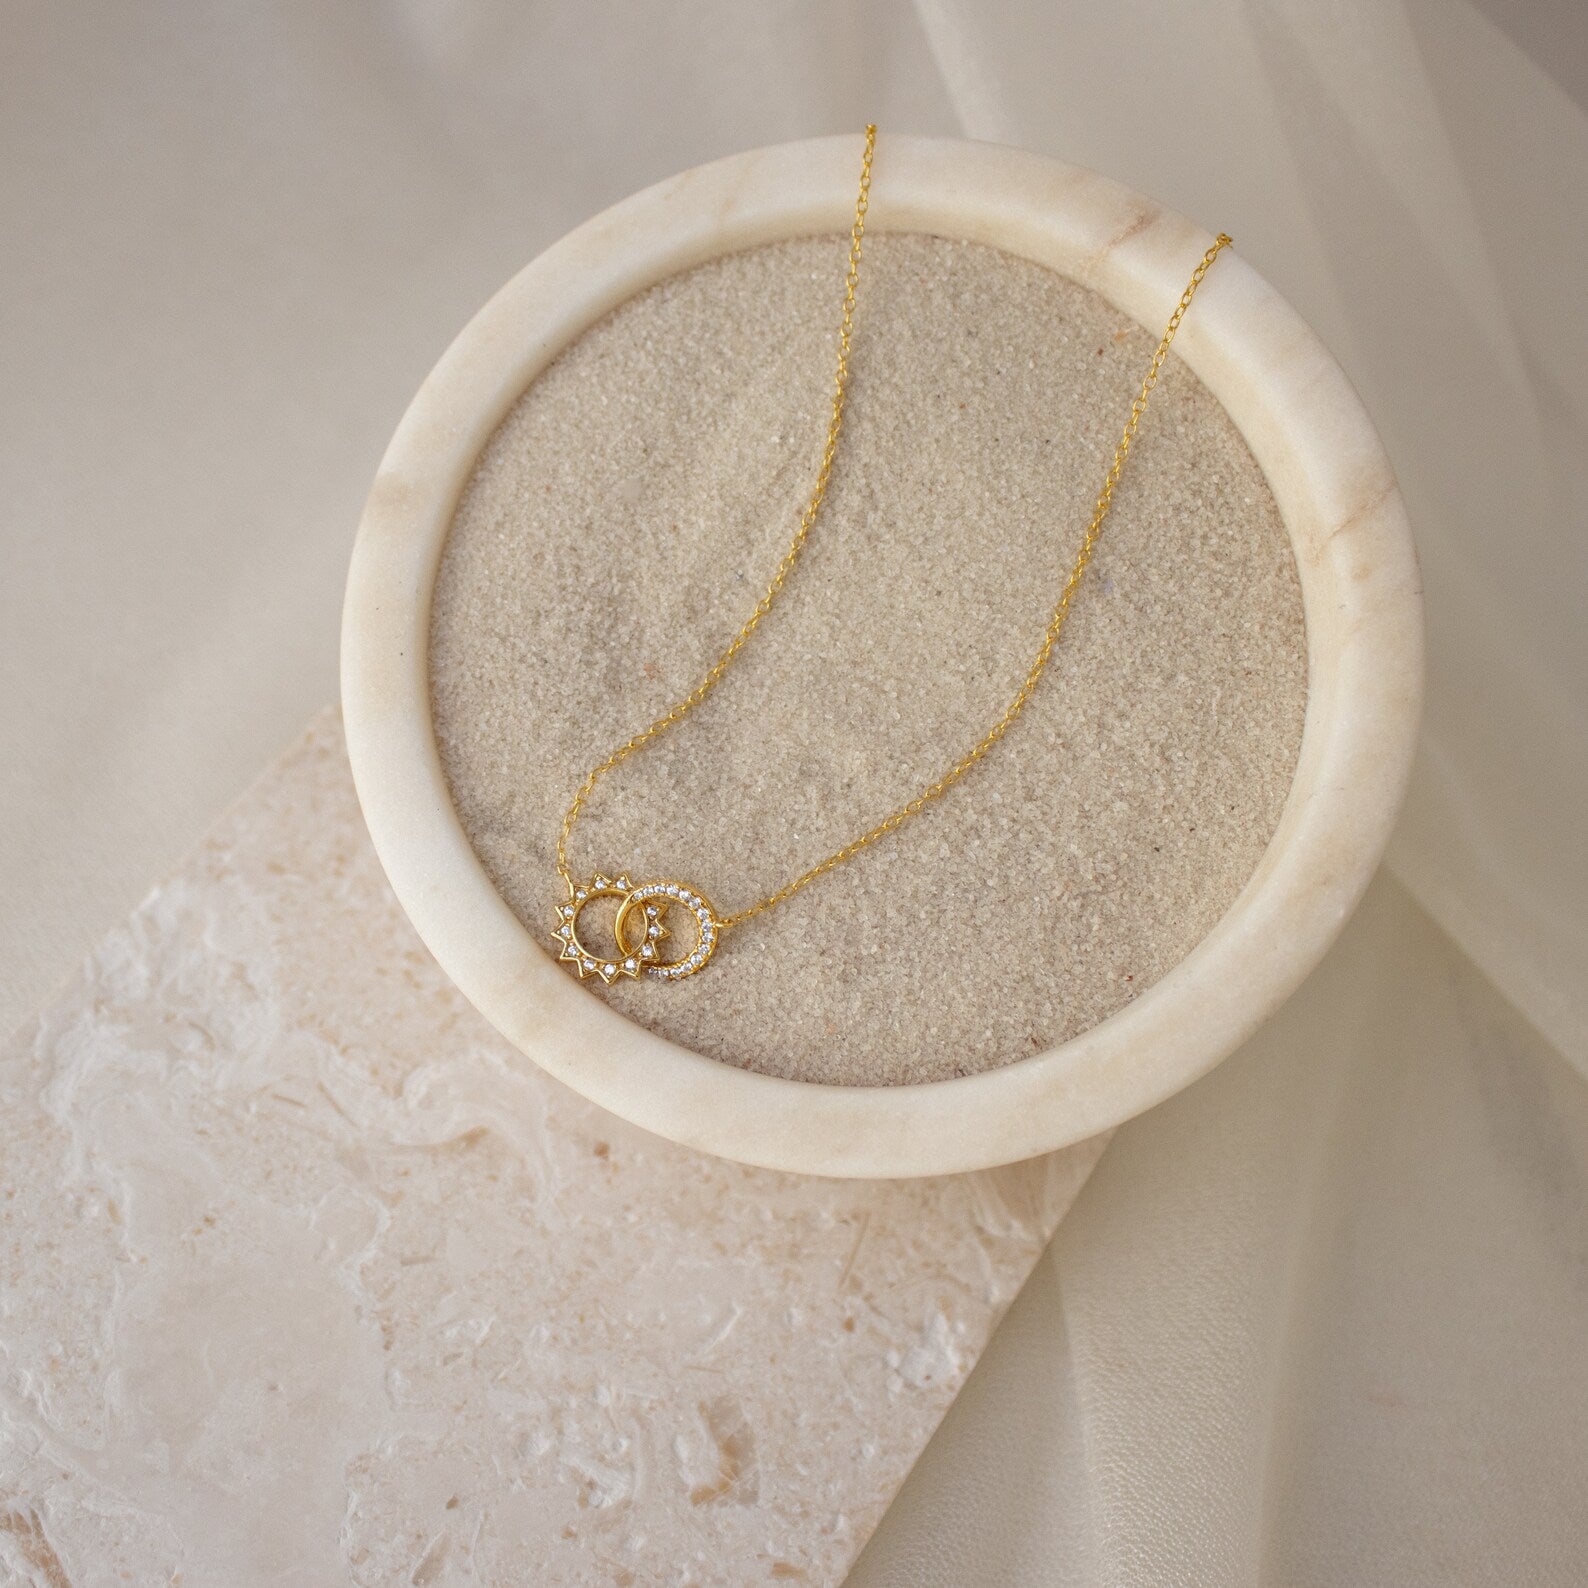 Minimalist Dainty Moon Gold Necklace Delicate Short Necklace 